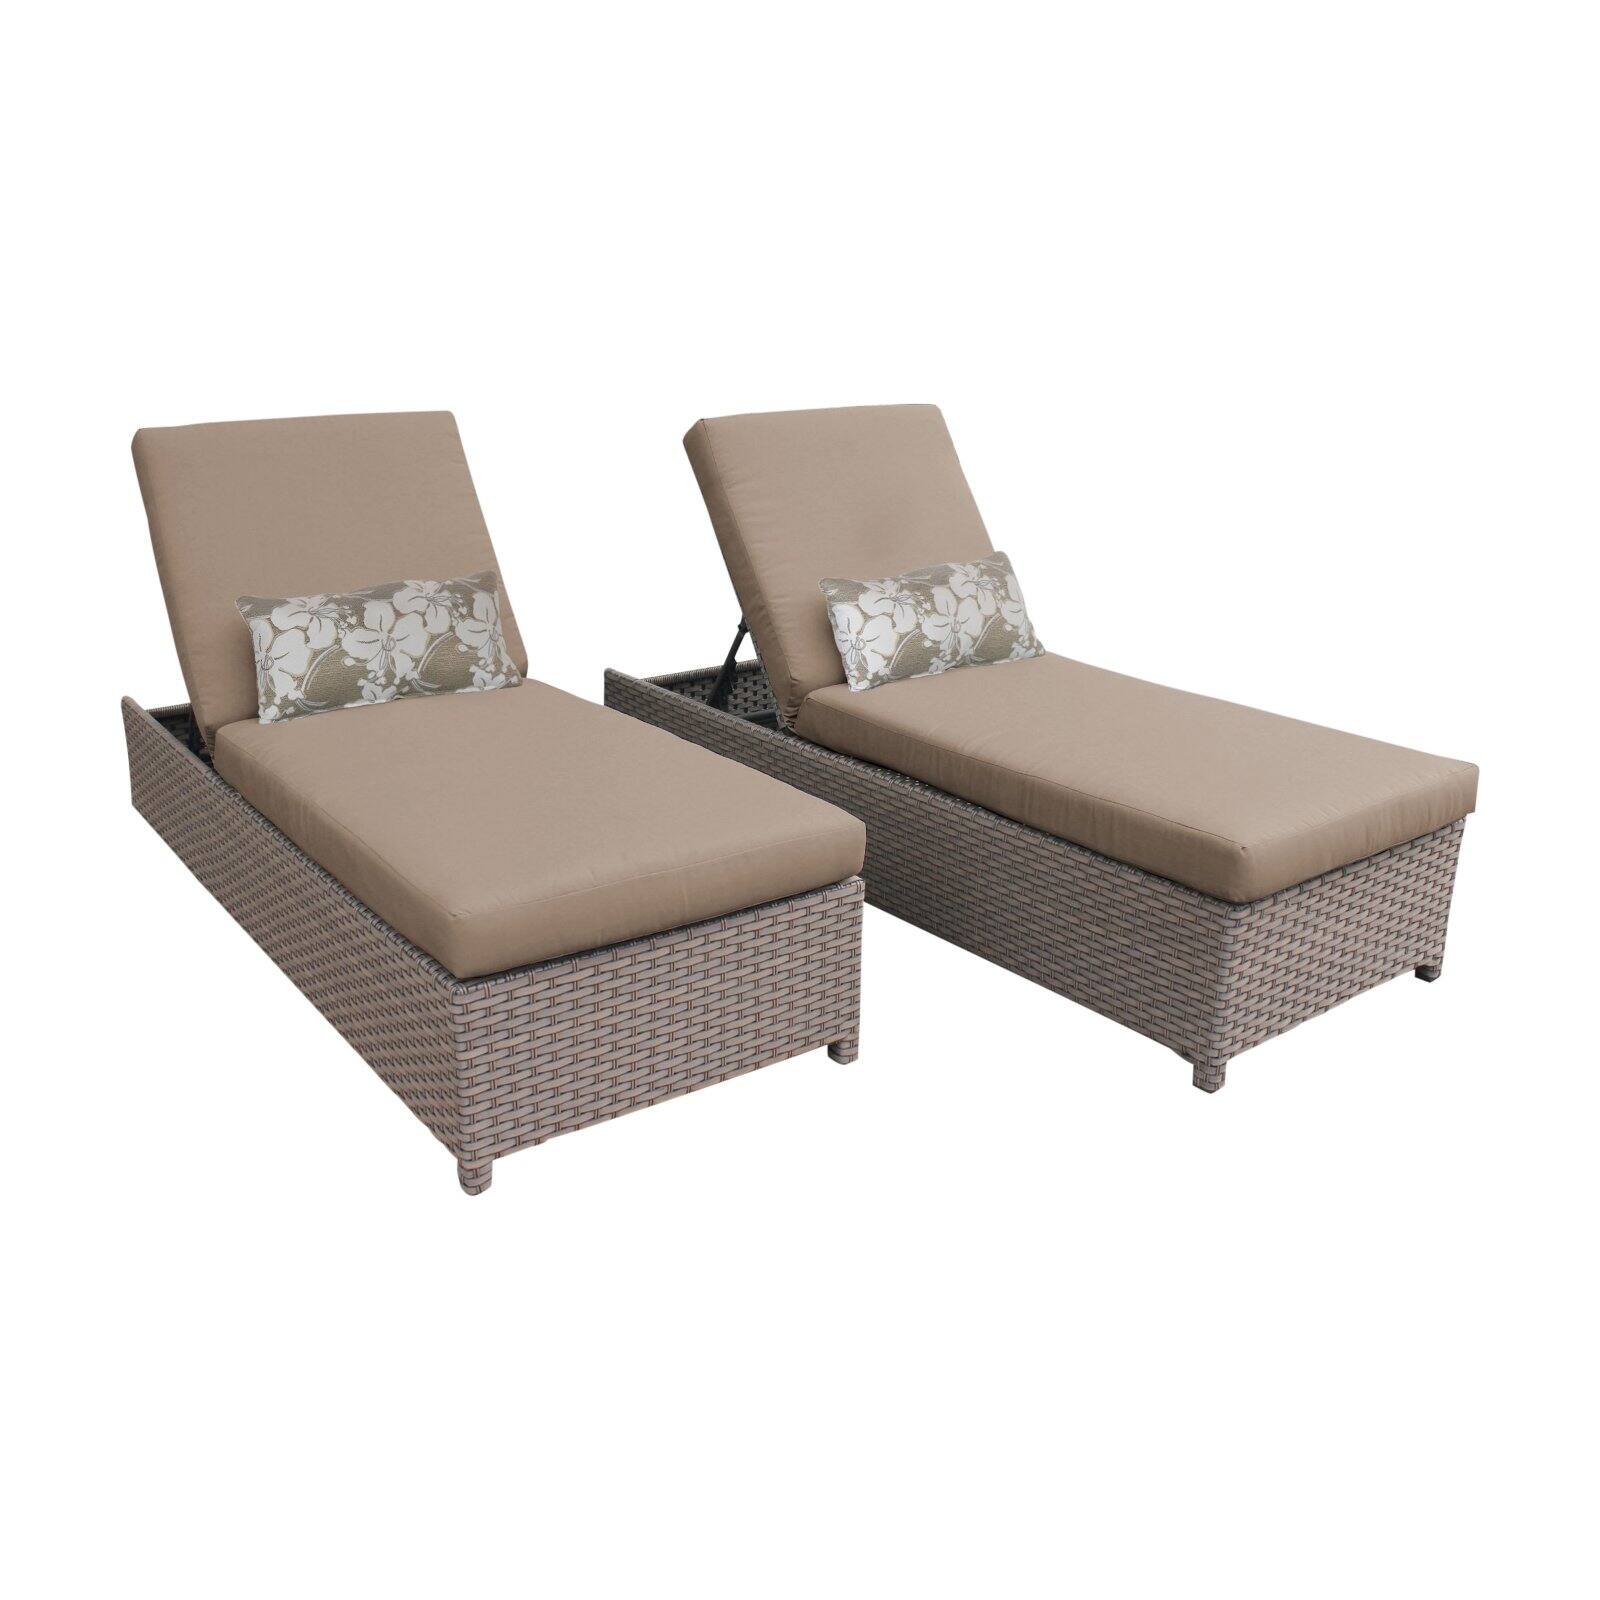 TK Classics Monterey Wheeled Wicker Outdoor Chaise Lounge Chair - Set of 2 - image 1 of 11